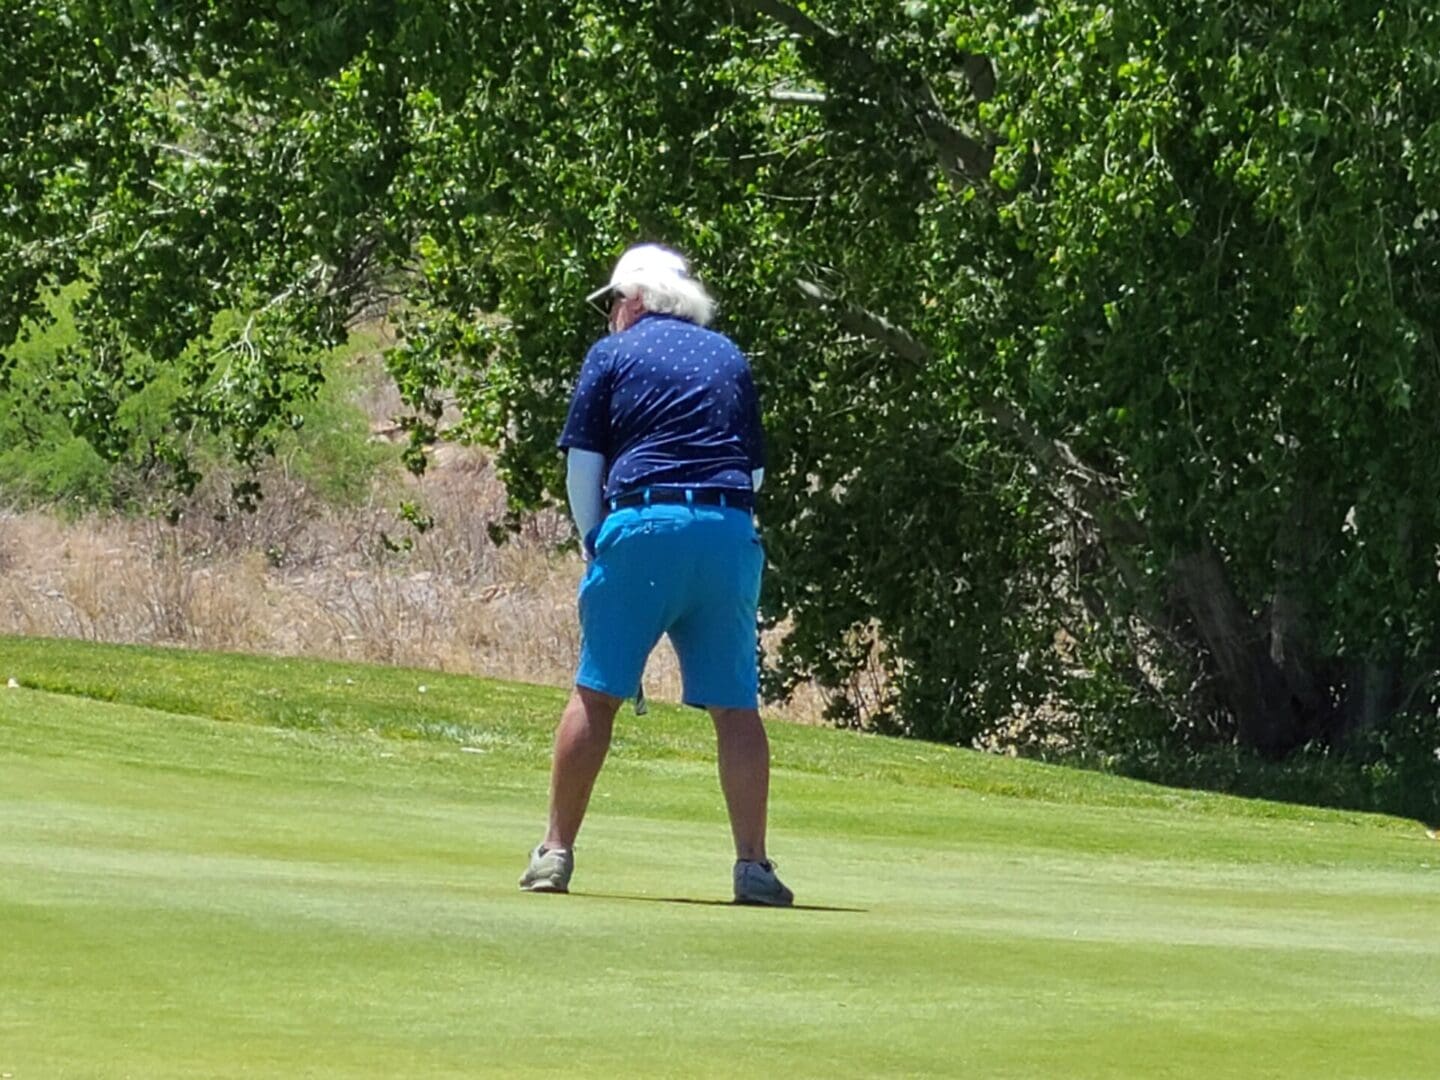 A man in blue shorts and a jacket is playing golf.